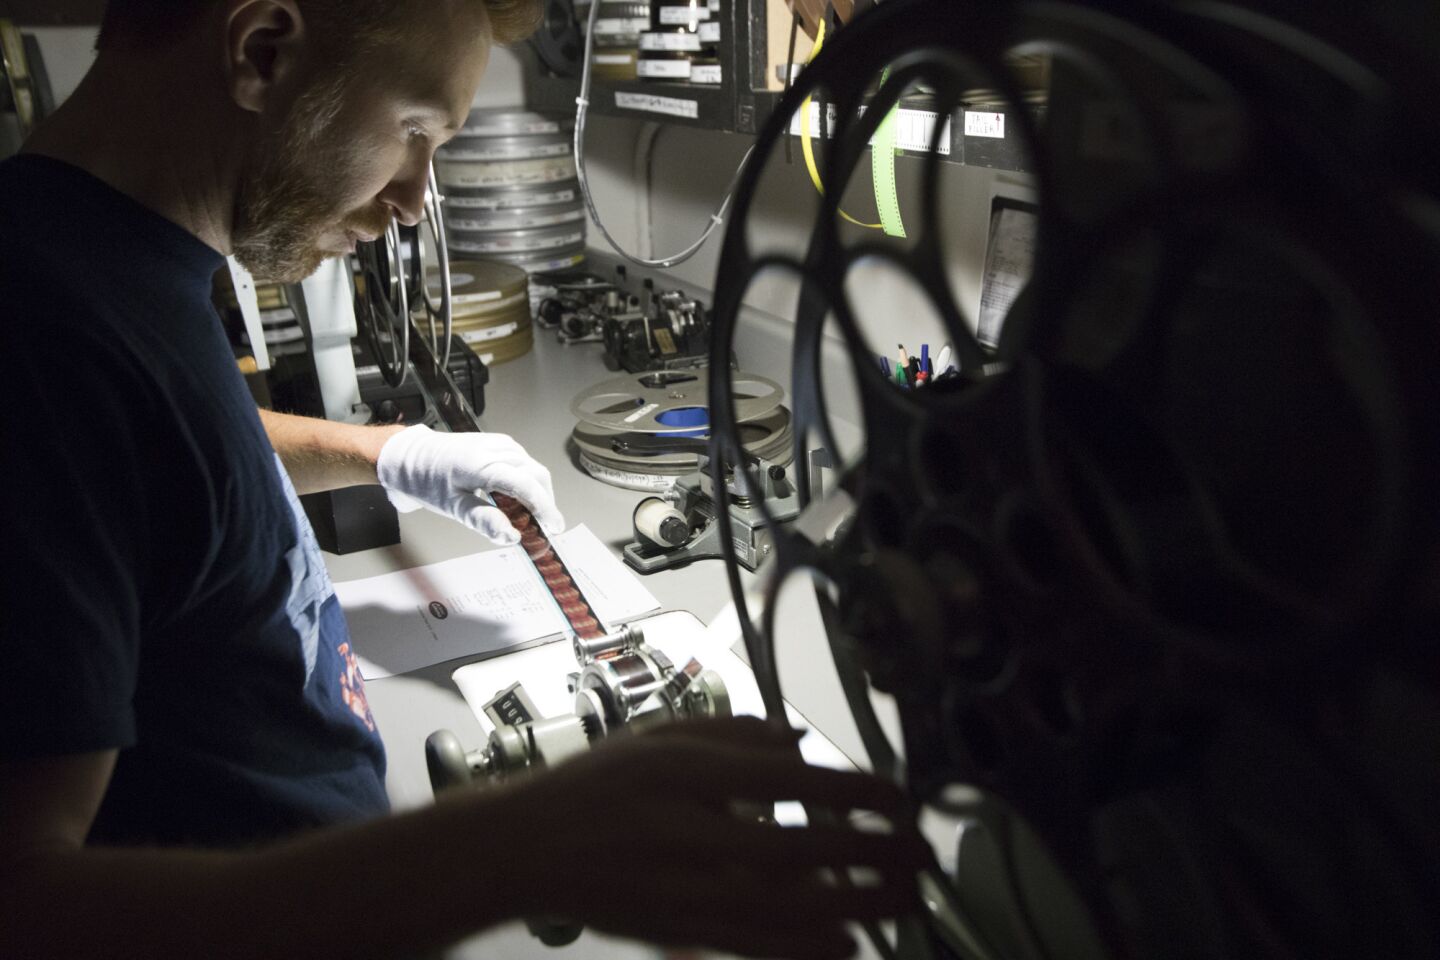 New Beverly Cinema archivist Aaron Martz inspects a film to make sure it's not damaged and is ready for its next screening.